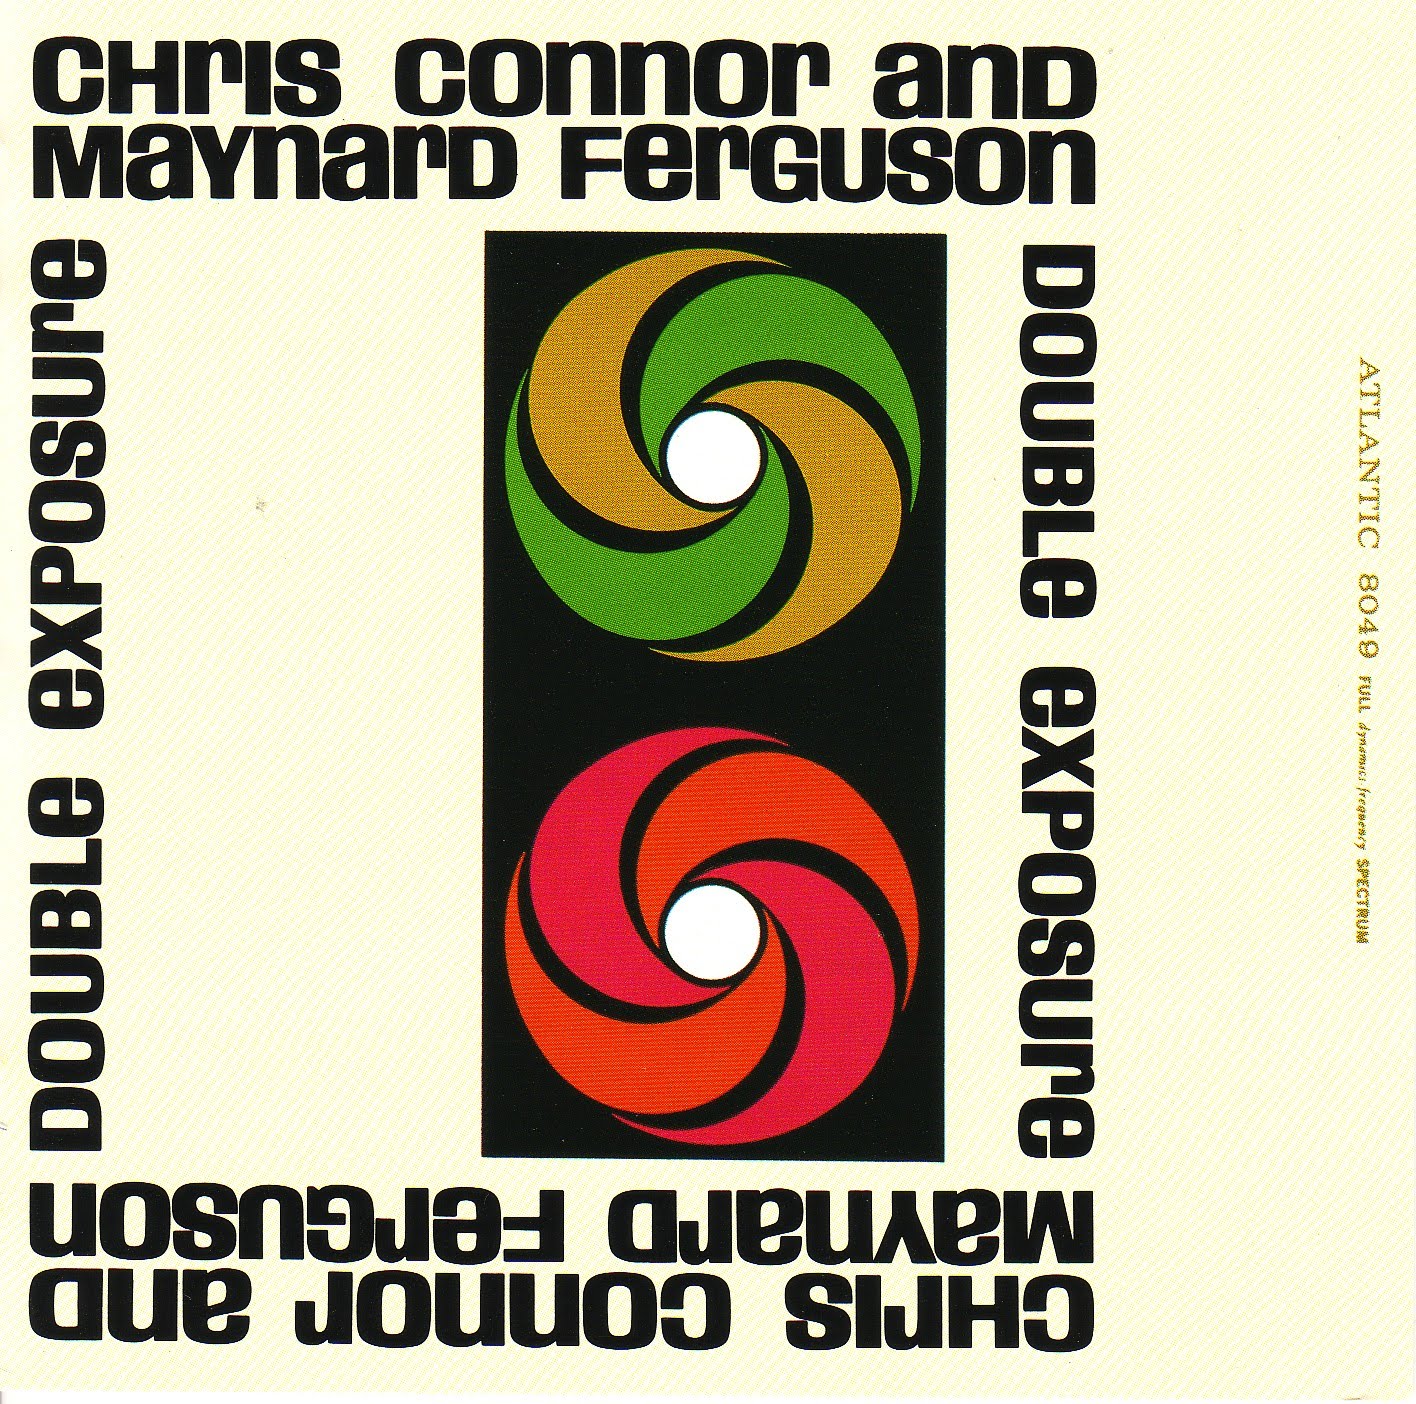 CHRIS CONNOR - Double Exposure cover 